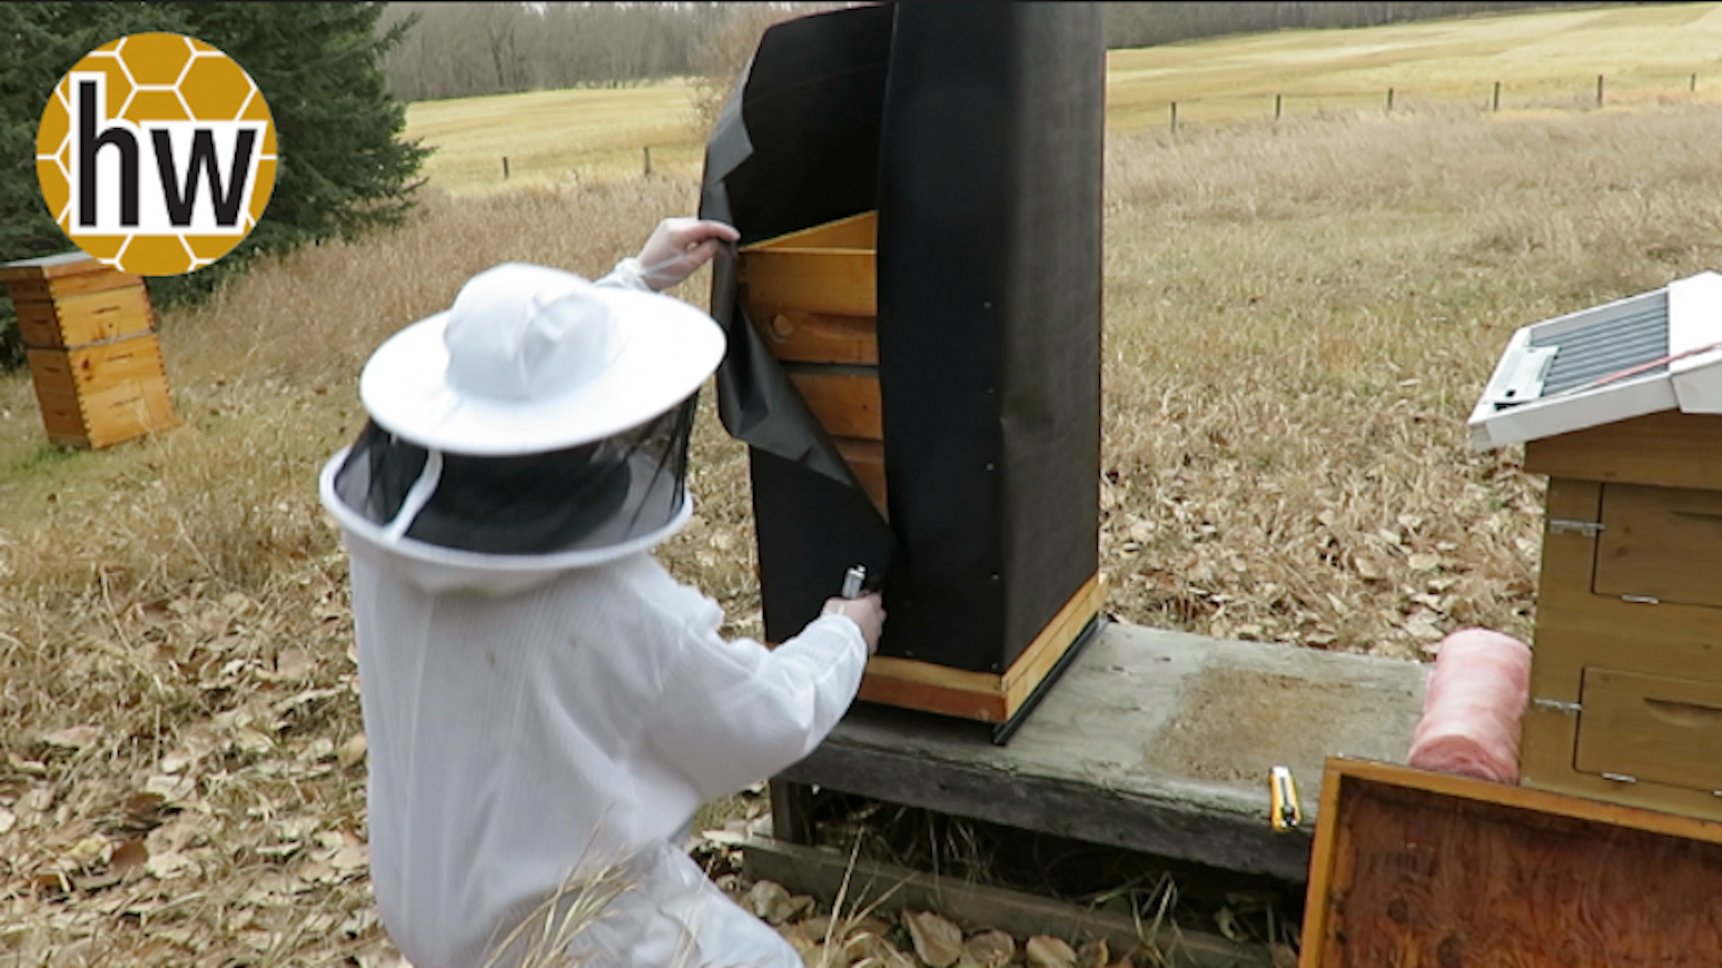 Overwintering: Which way do you wrap or insulate your hives?